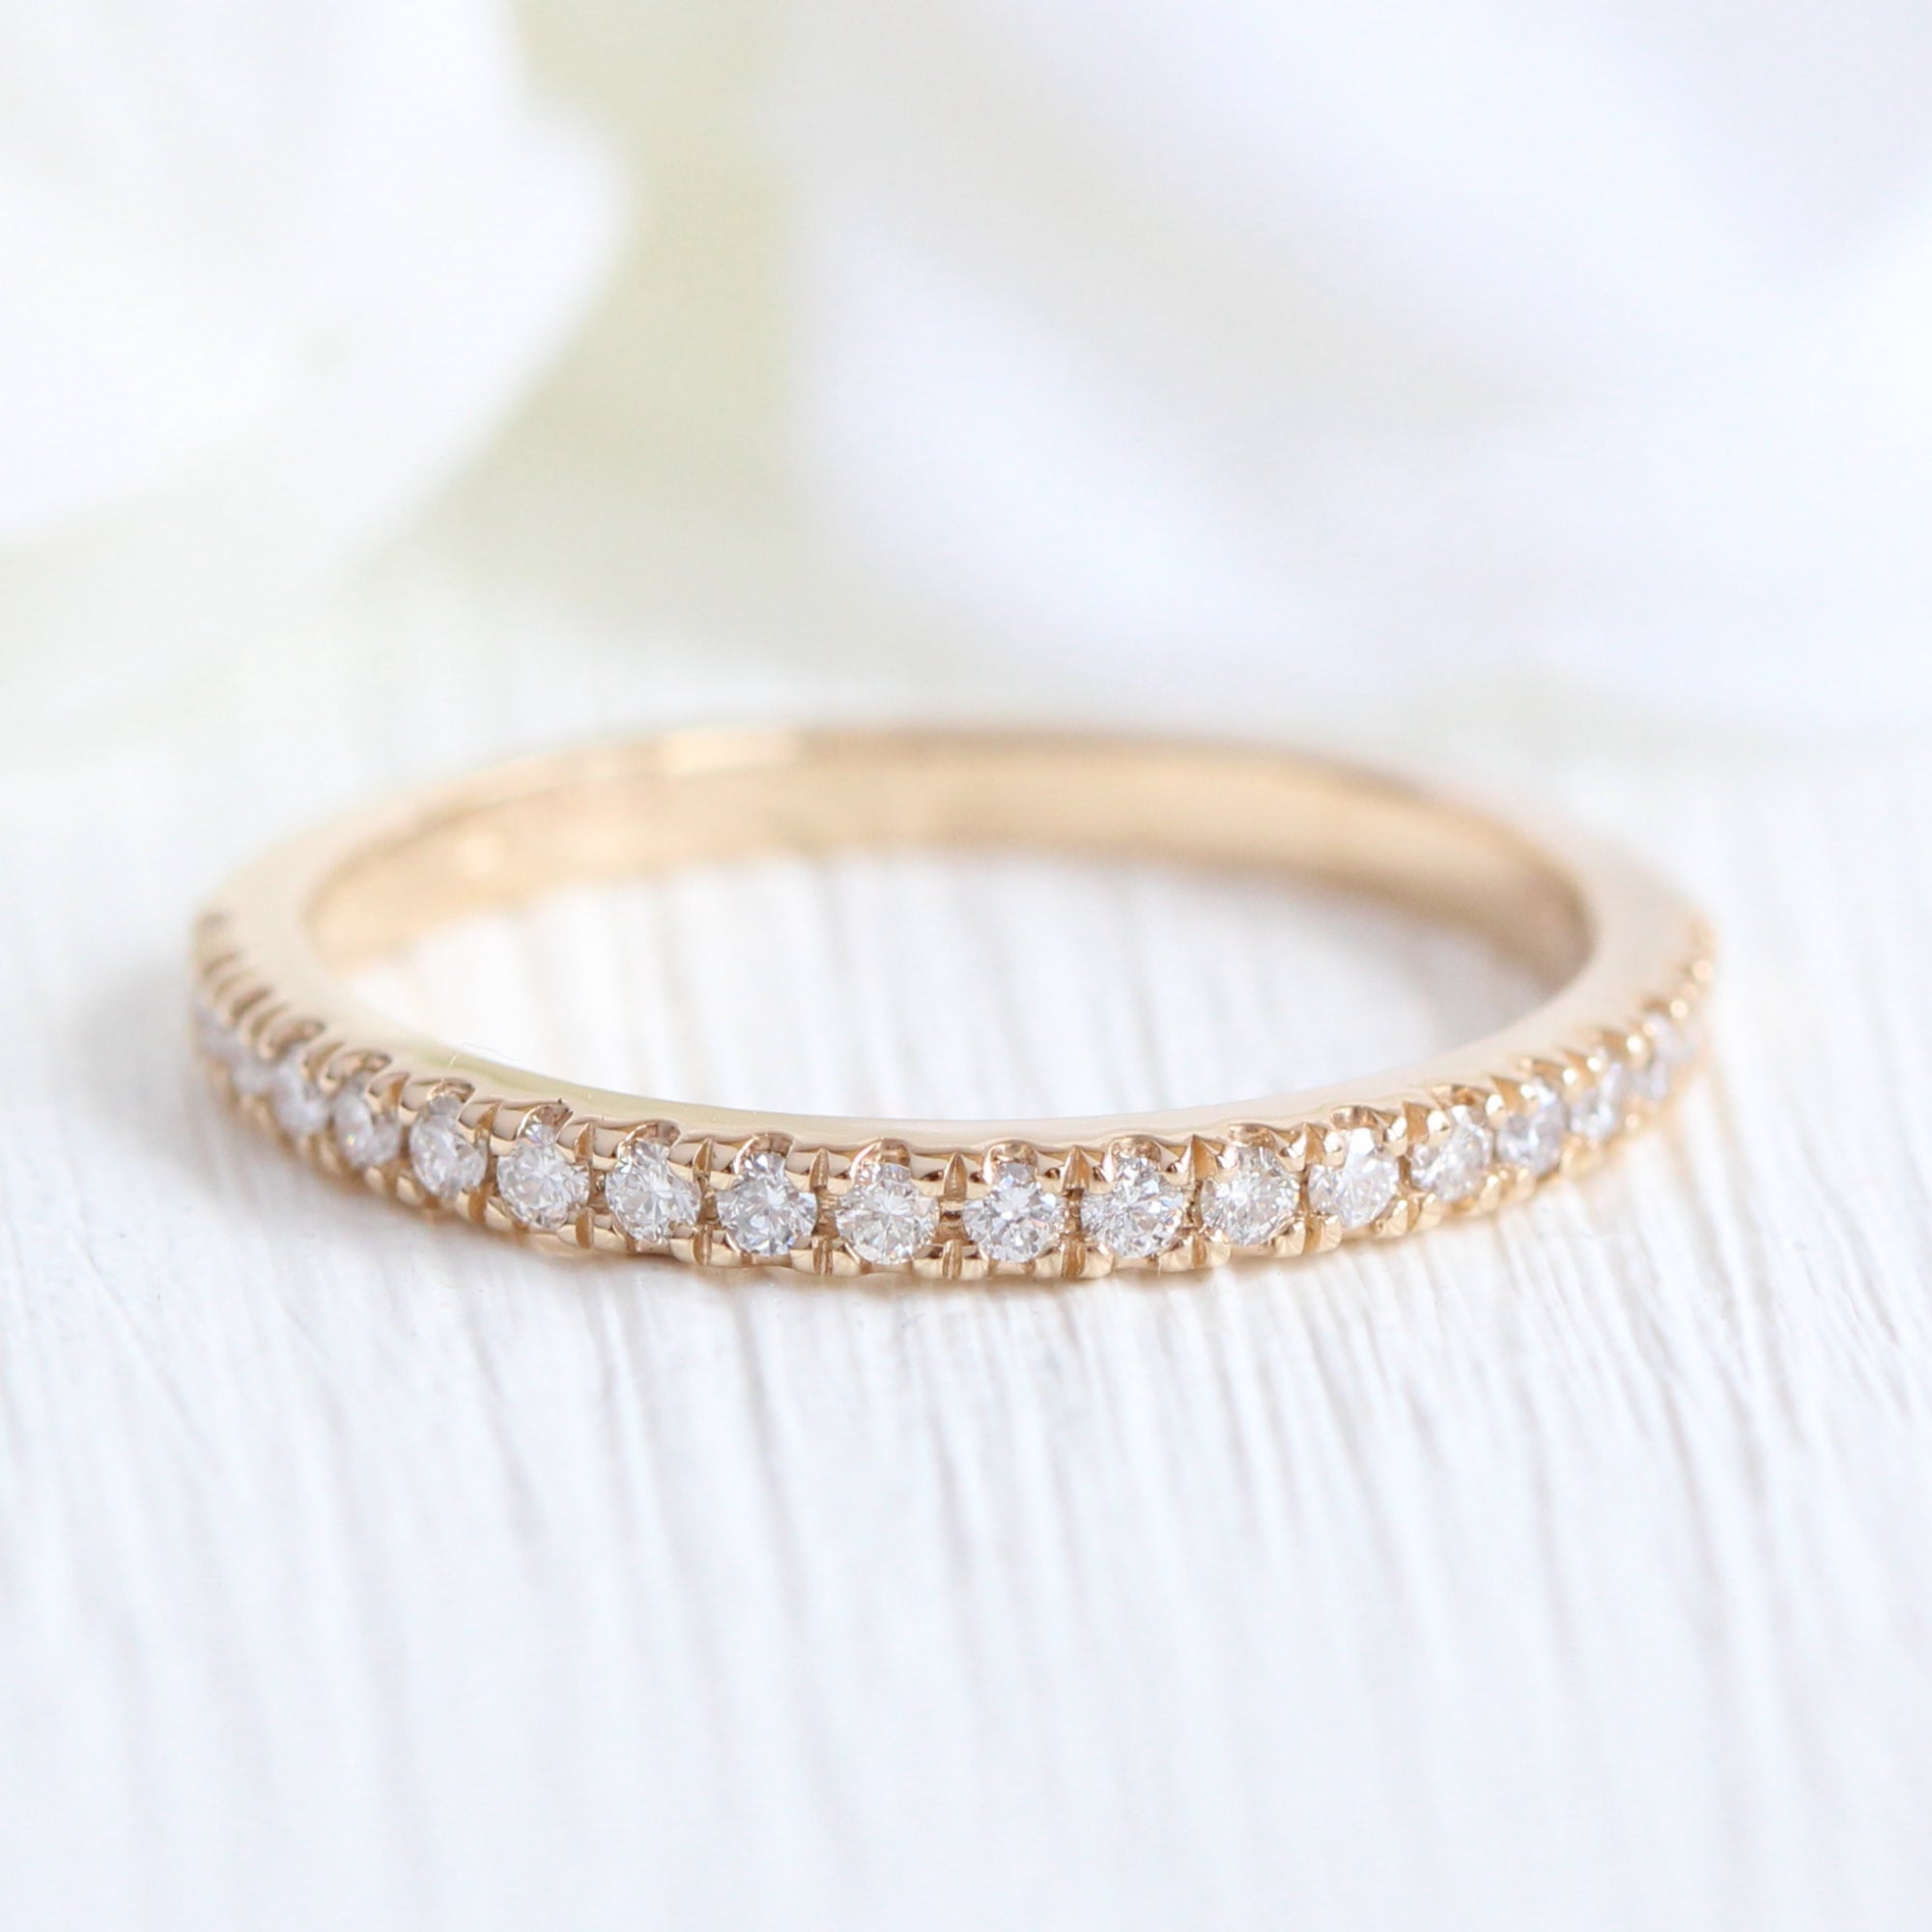 Eternity wedding band, white gold and diamonds - Categories